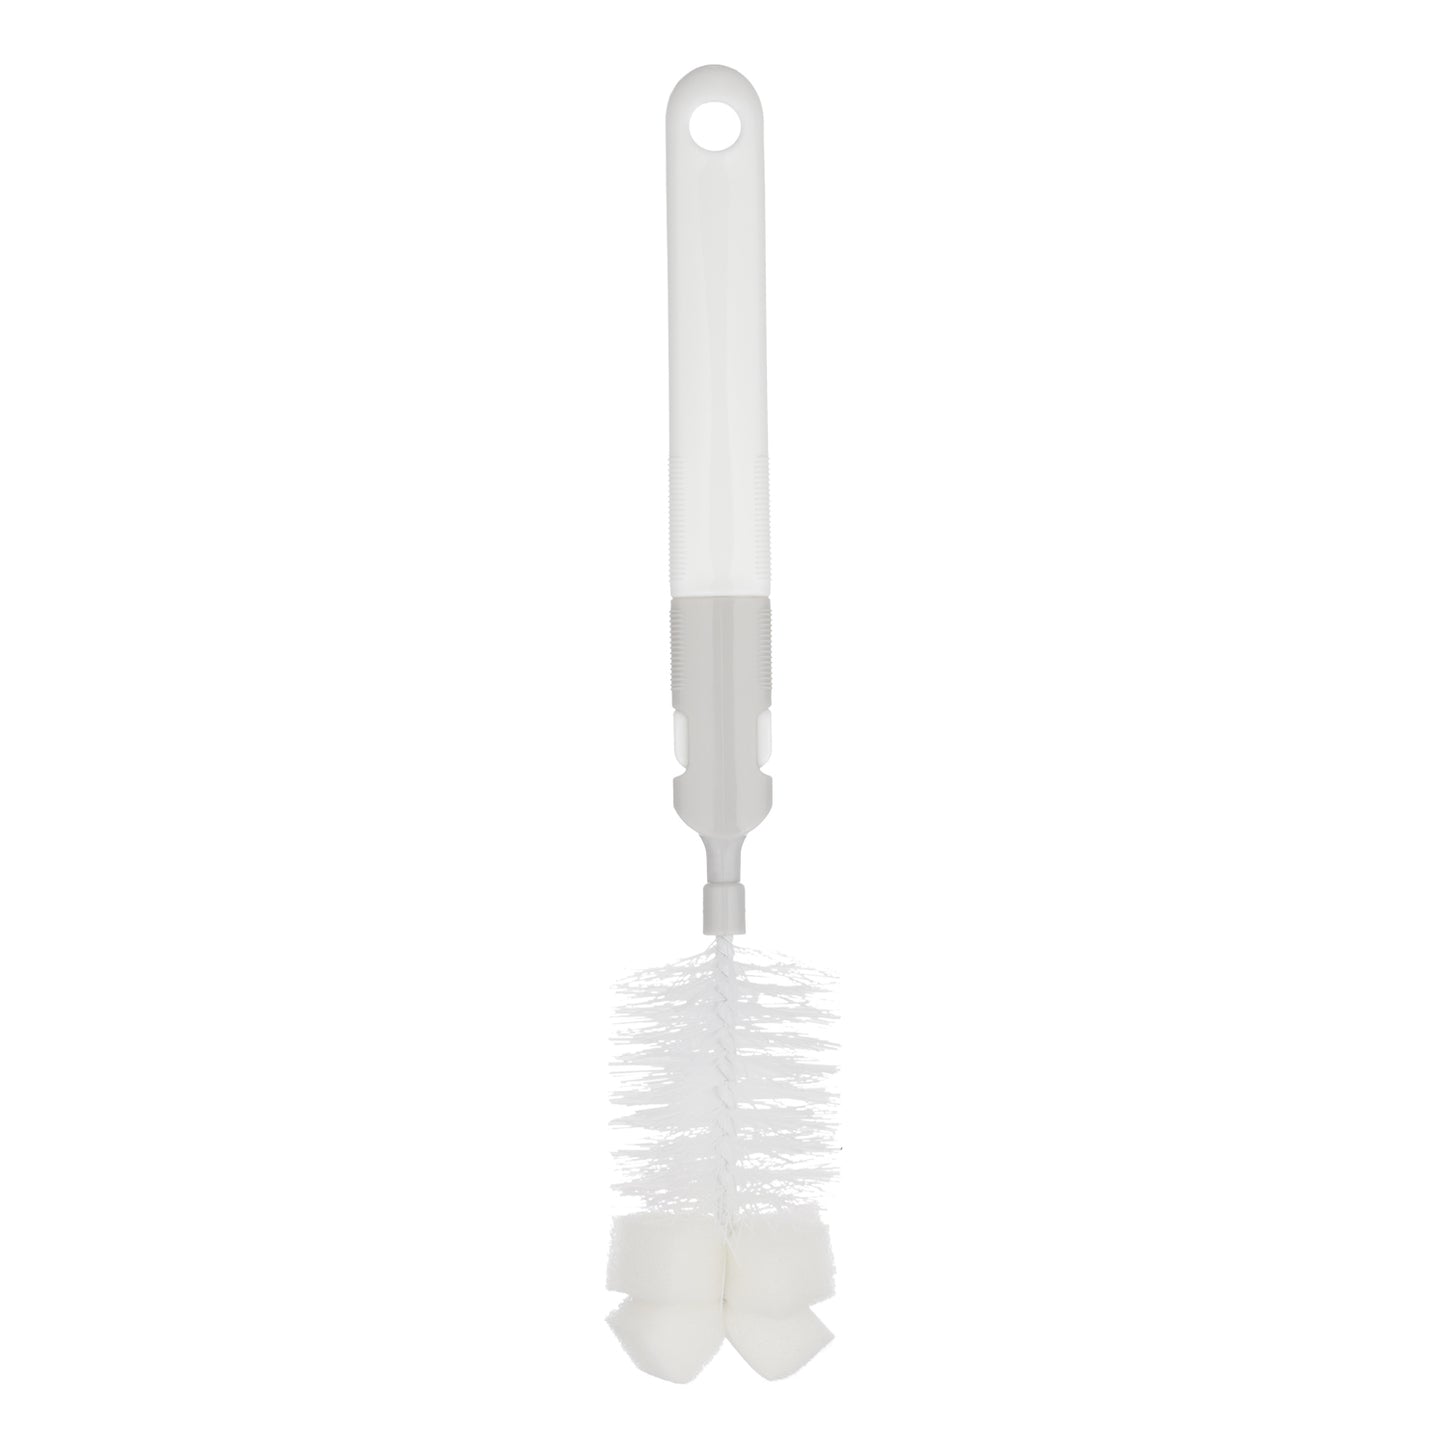 Canpol babies bottle and teat brush set with changeable ending